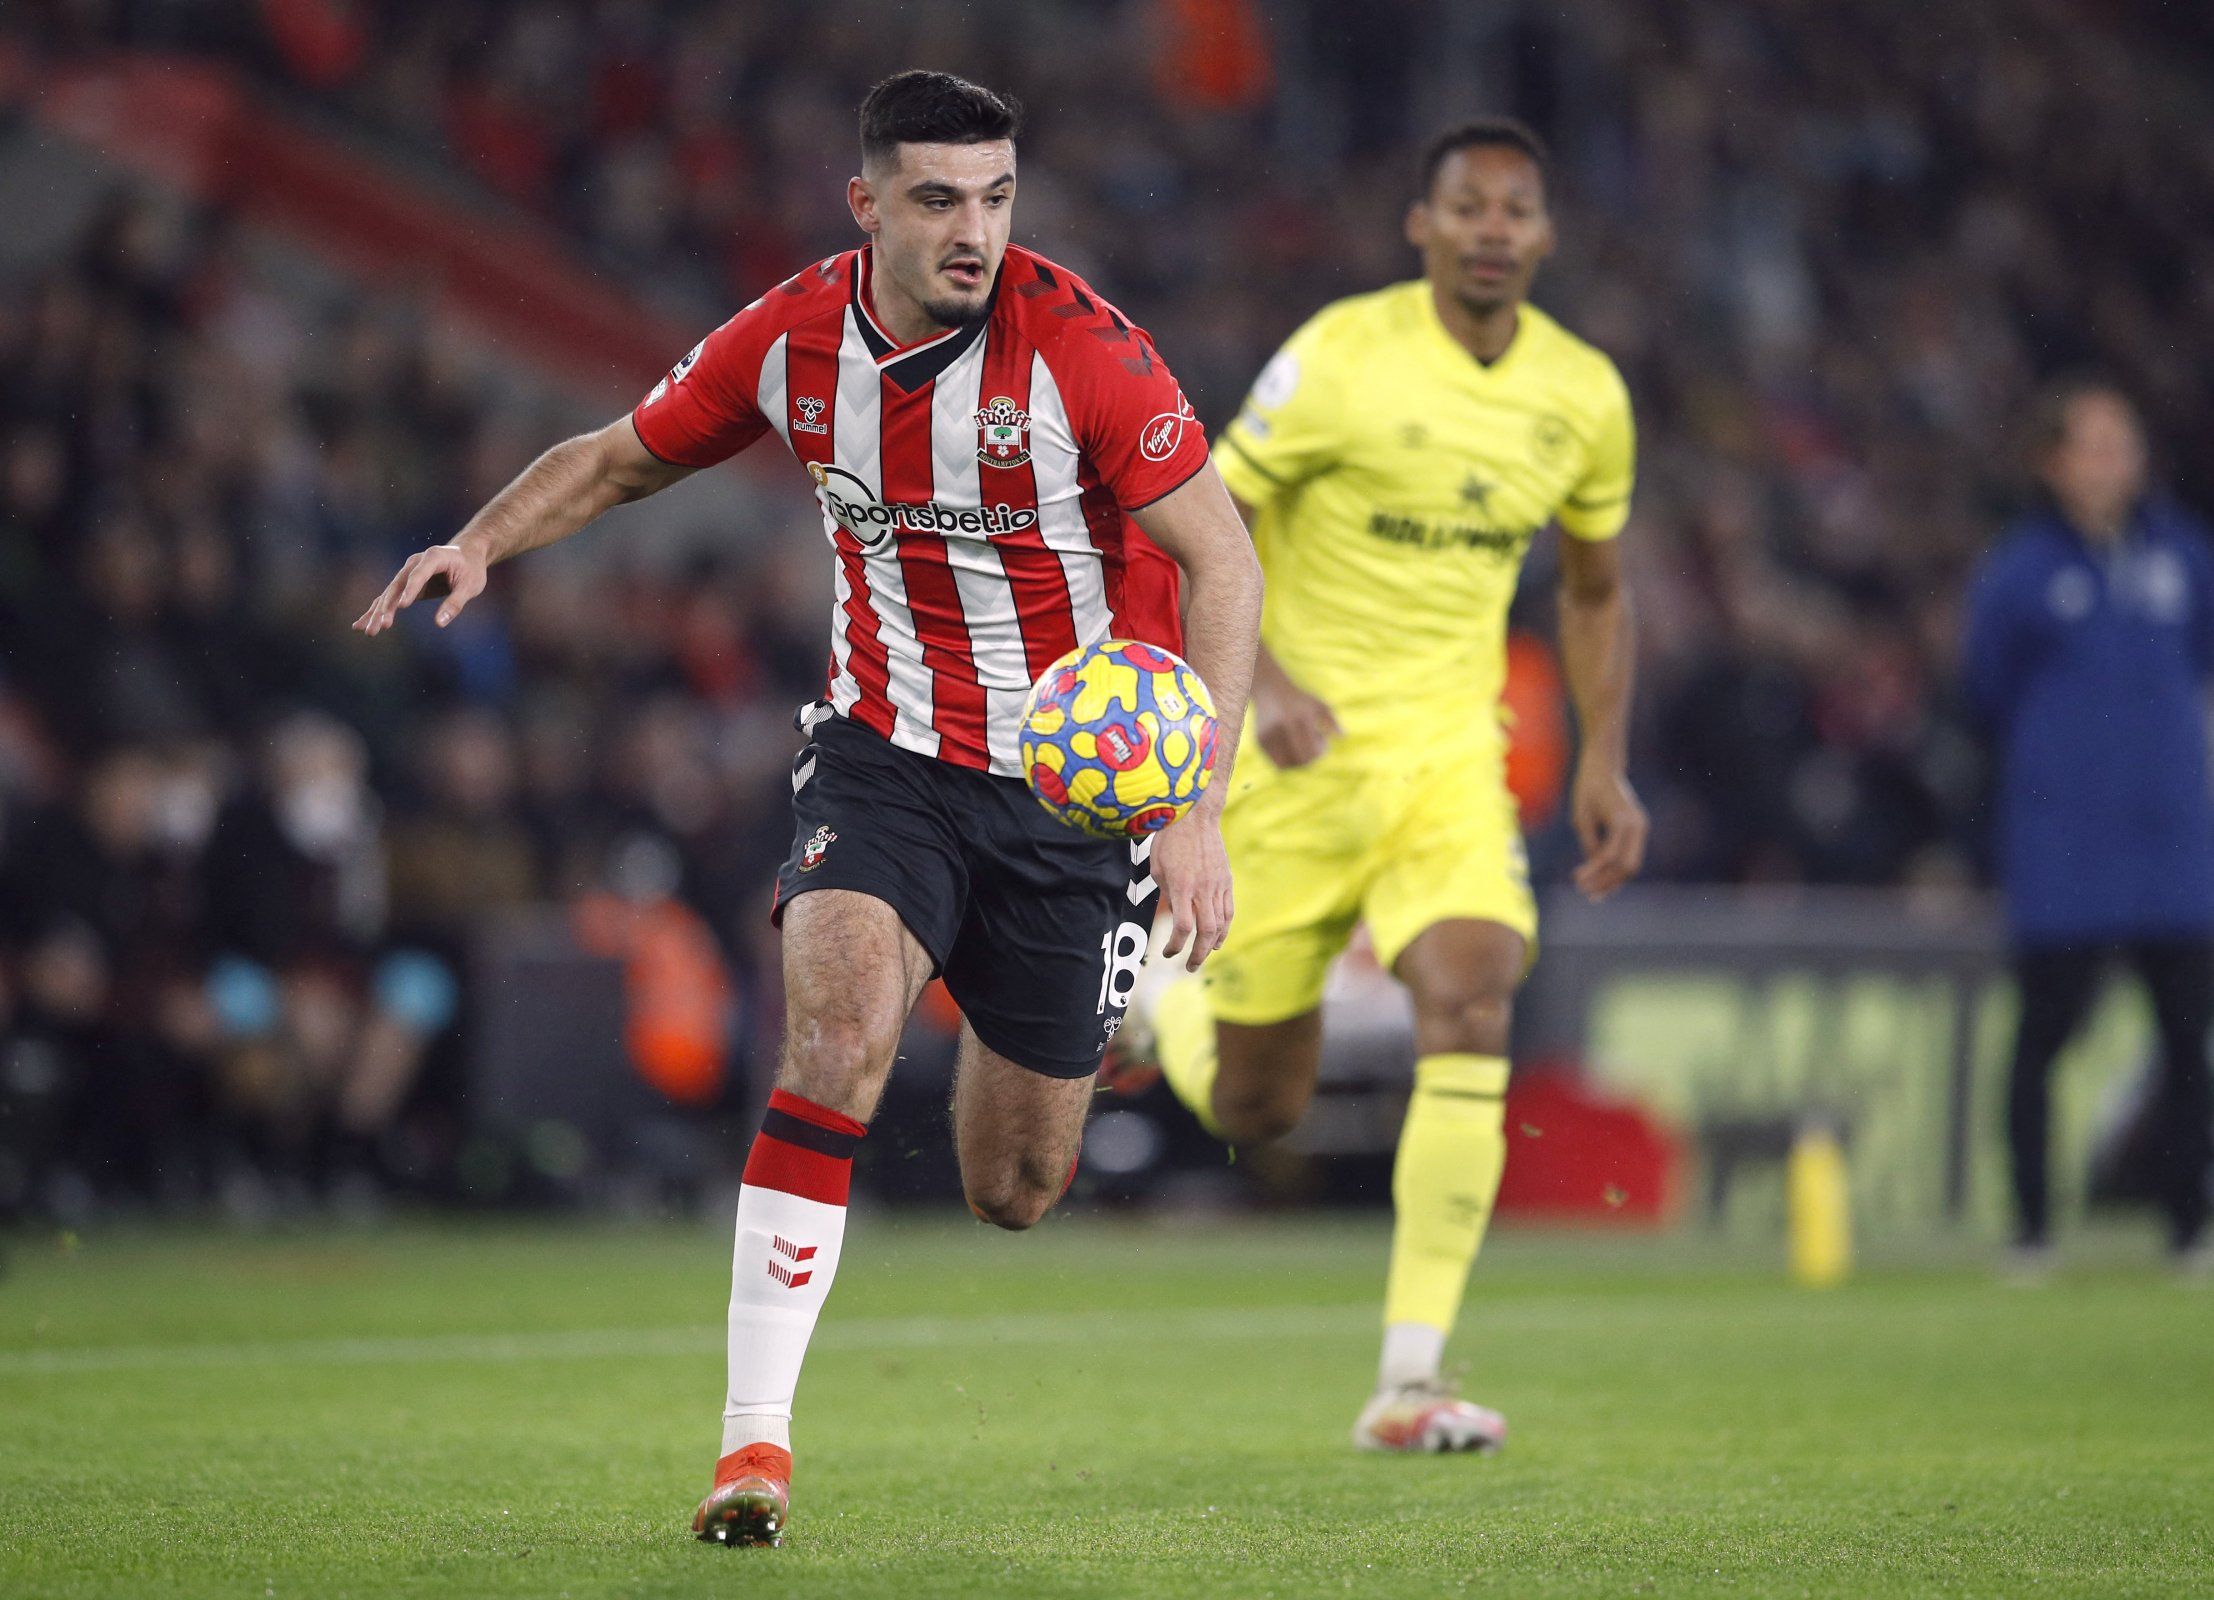 Chelsea loanee Armando Broja in action for Southampton against Brentford in the Premier League